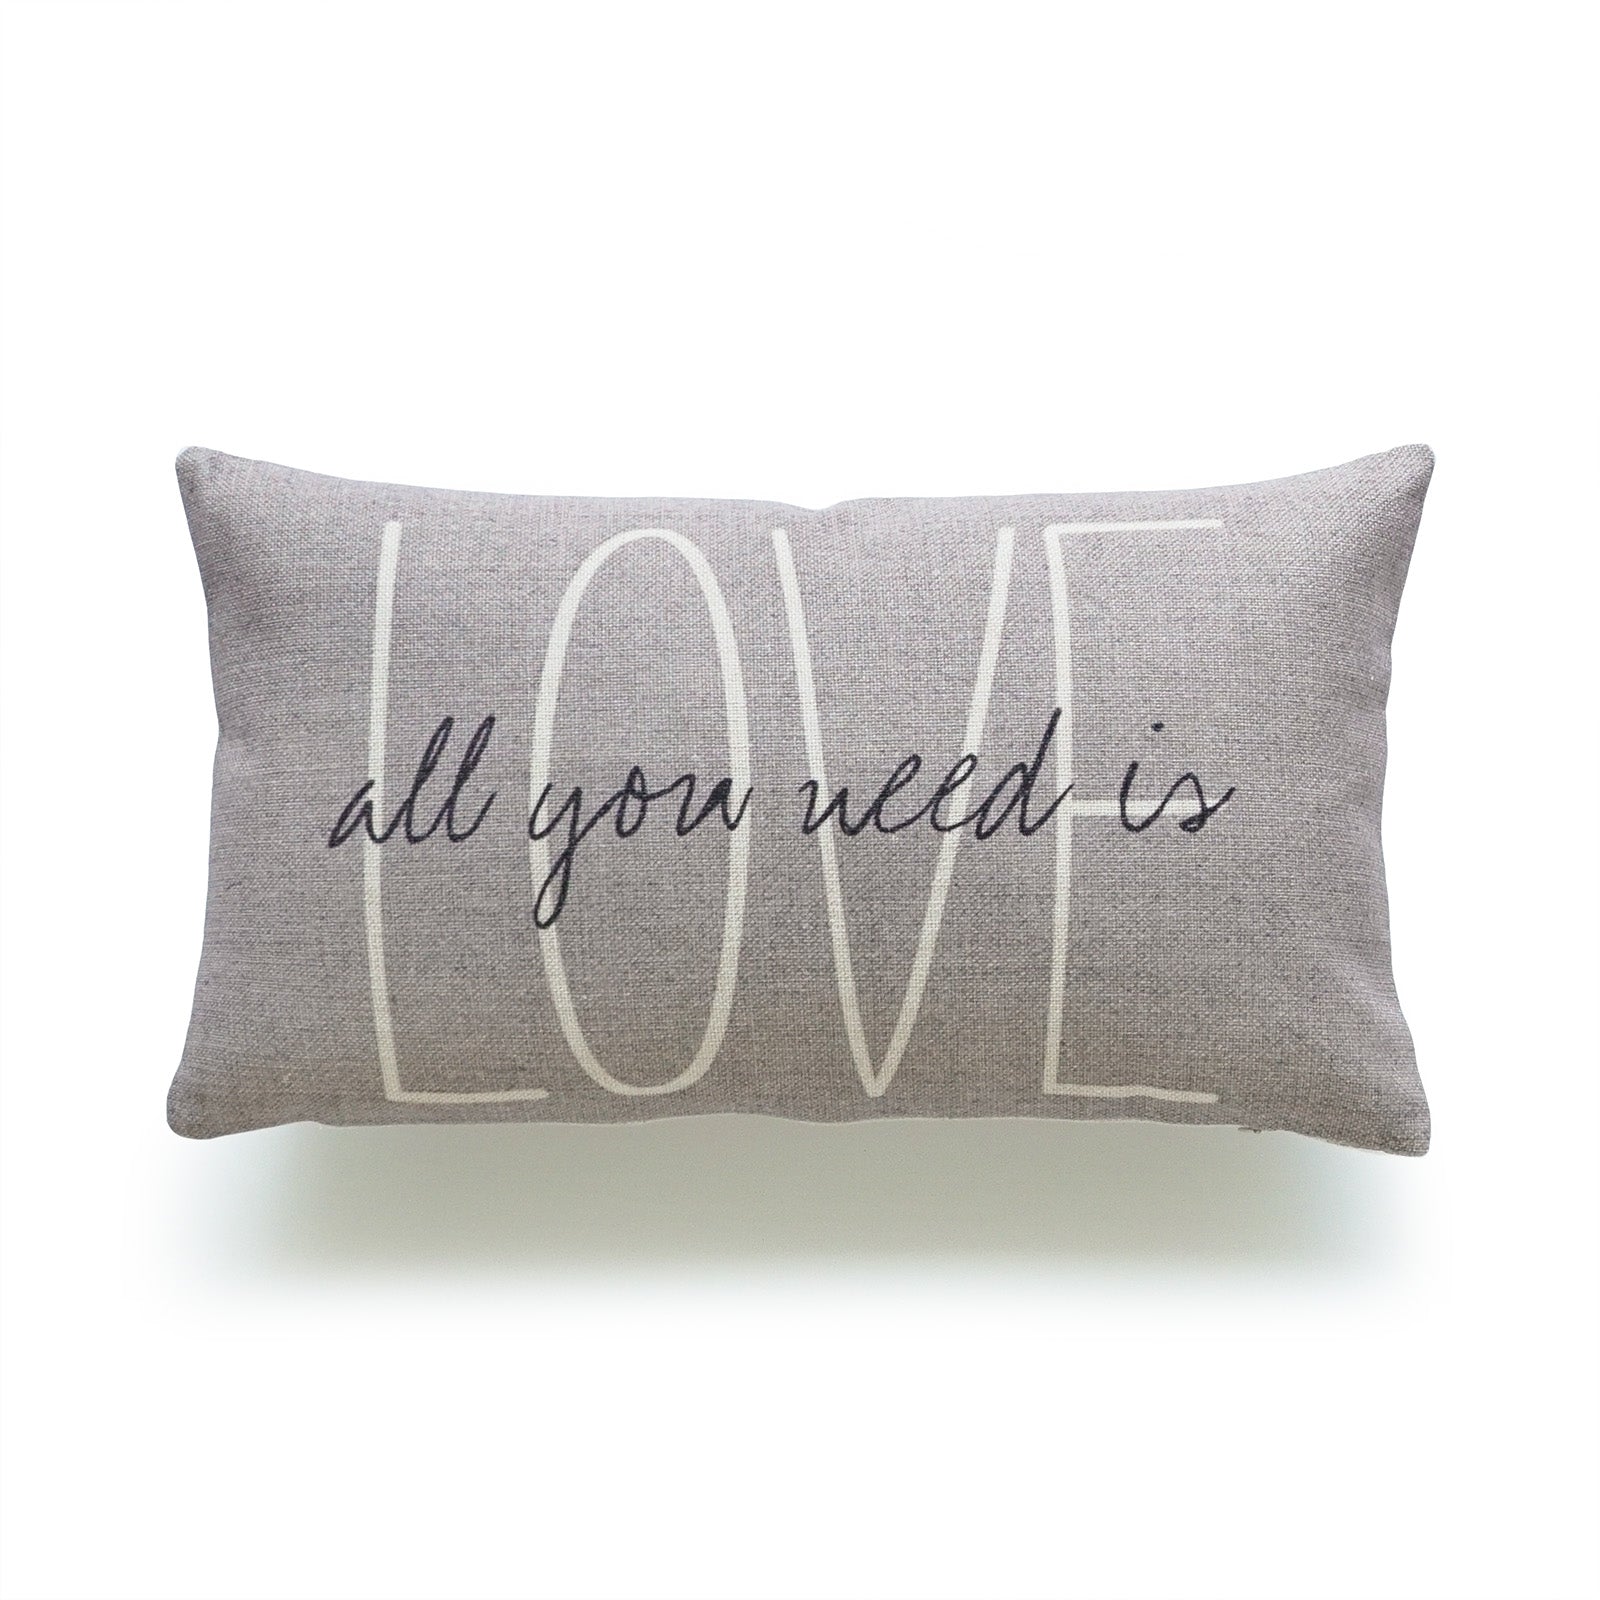 Rustic All You Need Is Love Lumbar Pillow Cover, Gray, 12"x20"